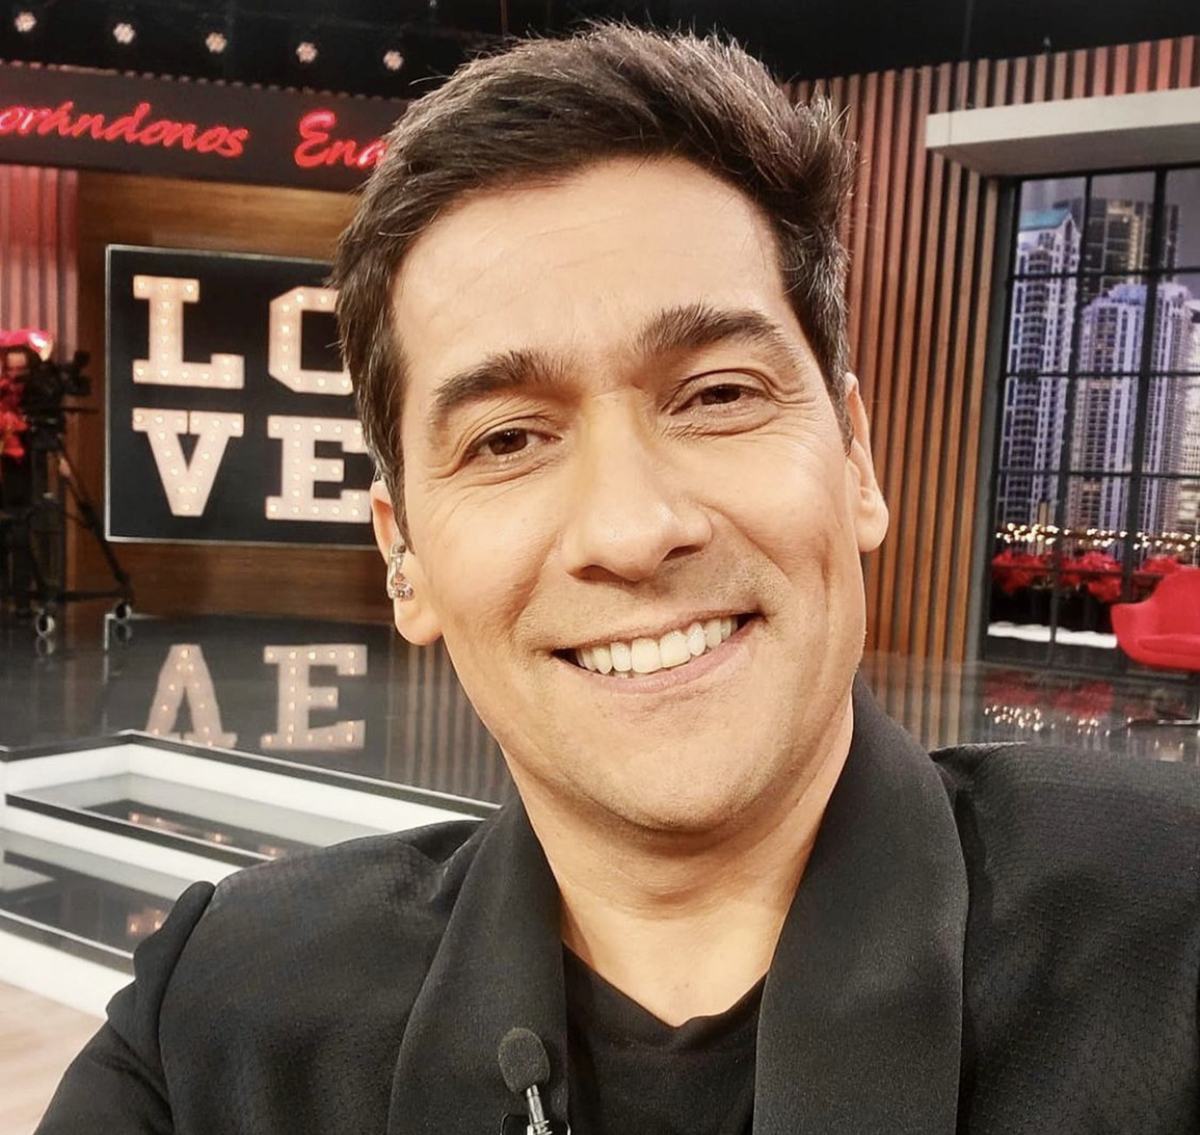 Rafael Araneda from ‘Falling in love’ responds if he is a good partner: “I am the best version of myself”